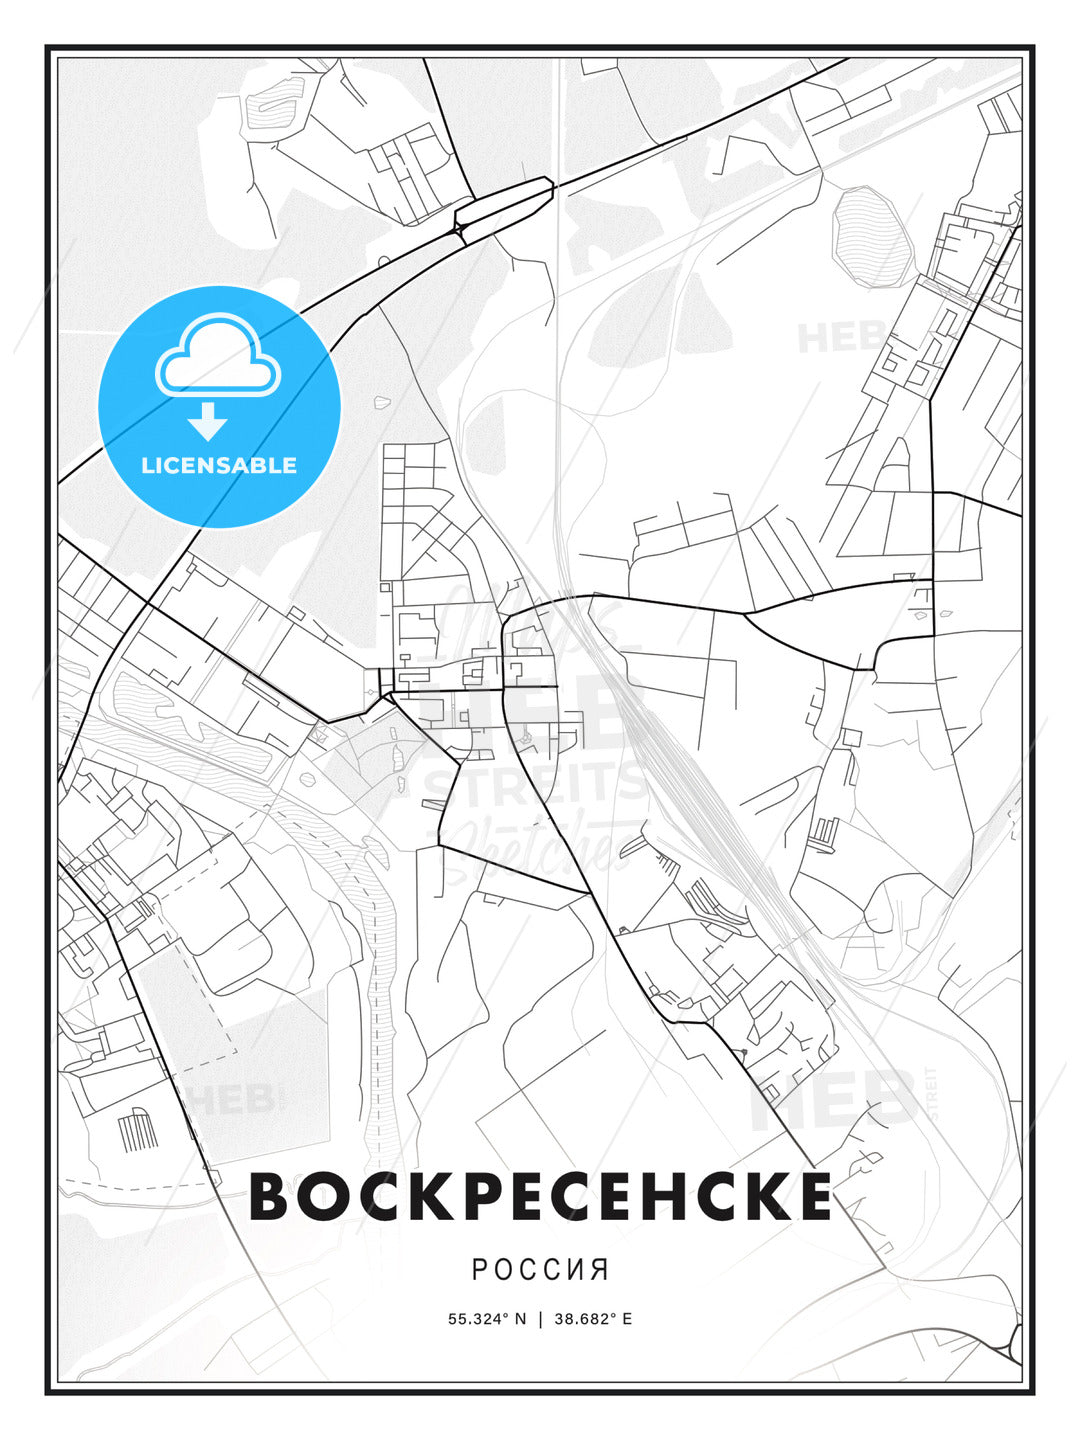 ВОСКРЕСЕНСКЕ / Voskresensk, Russia, Modern Print Template in Various Formats - HEBSTREITS Sketches